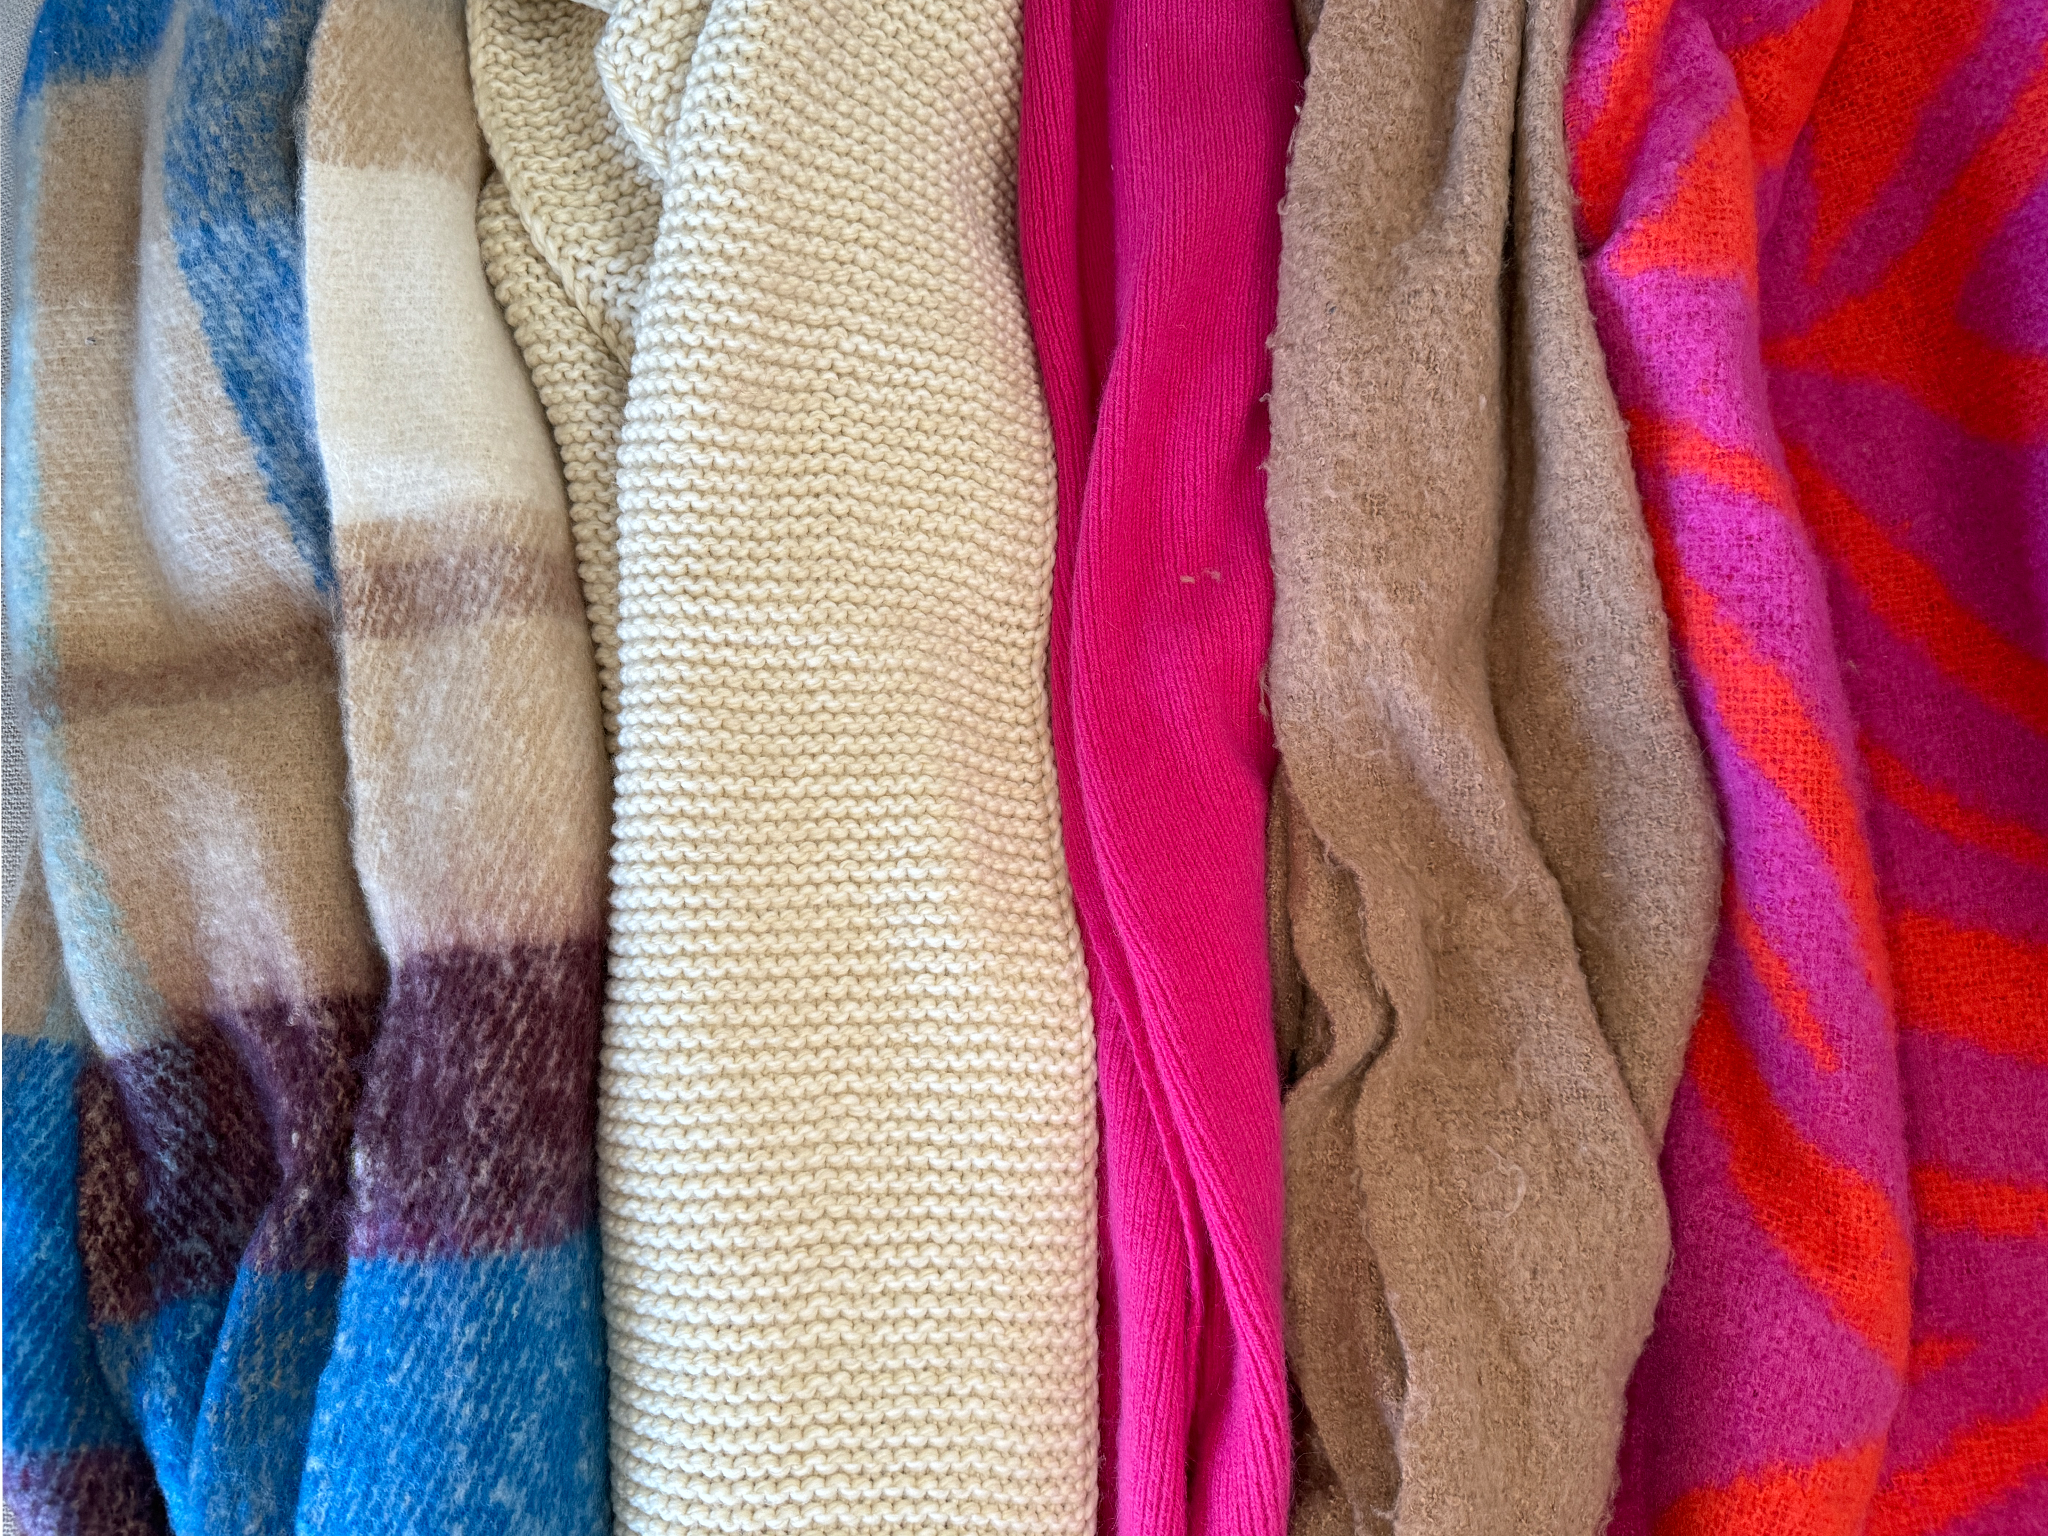 A selection of the best scarves we tested for this review